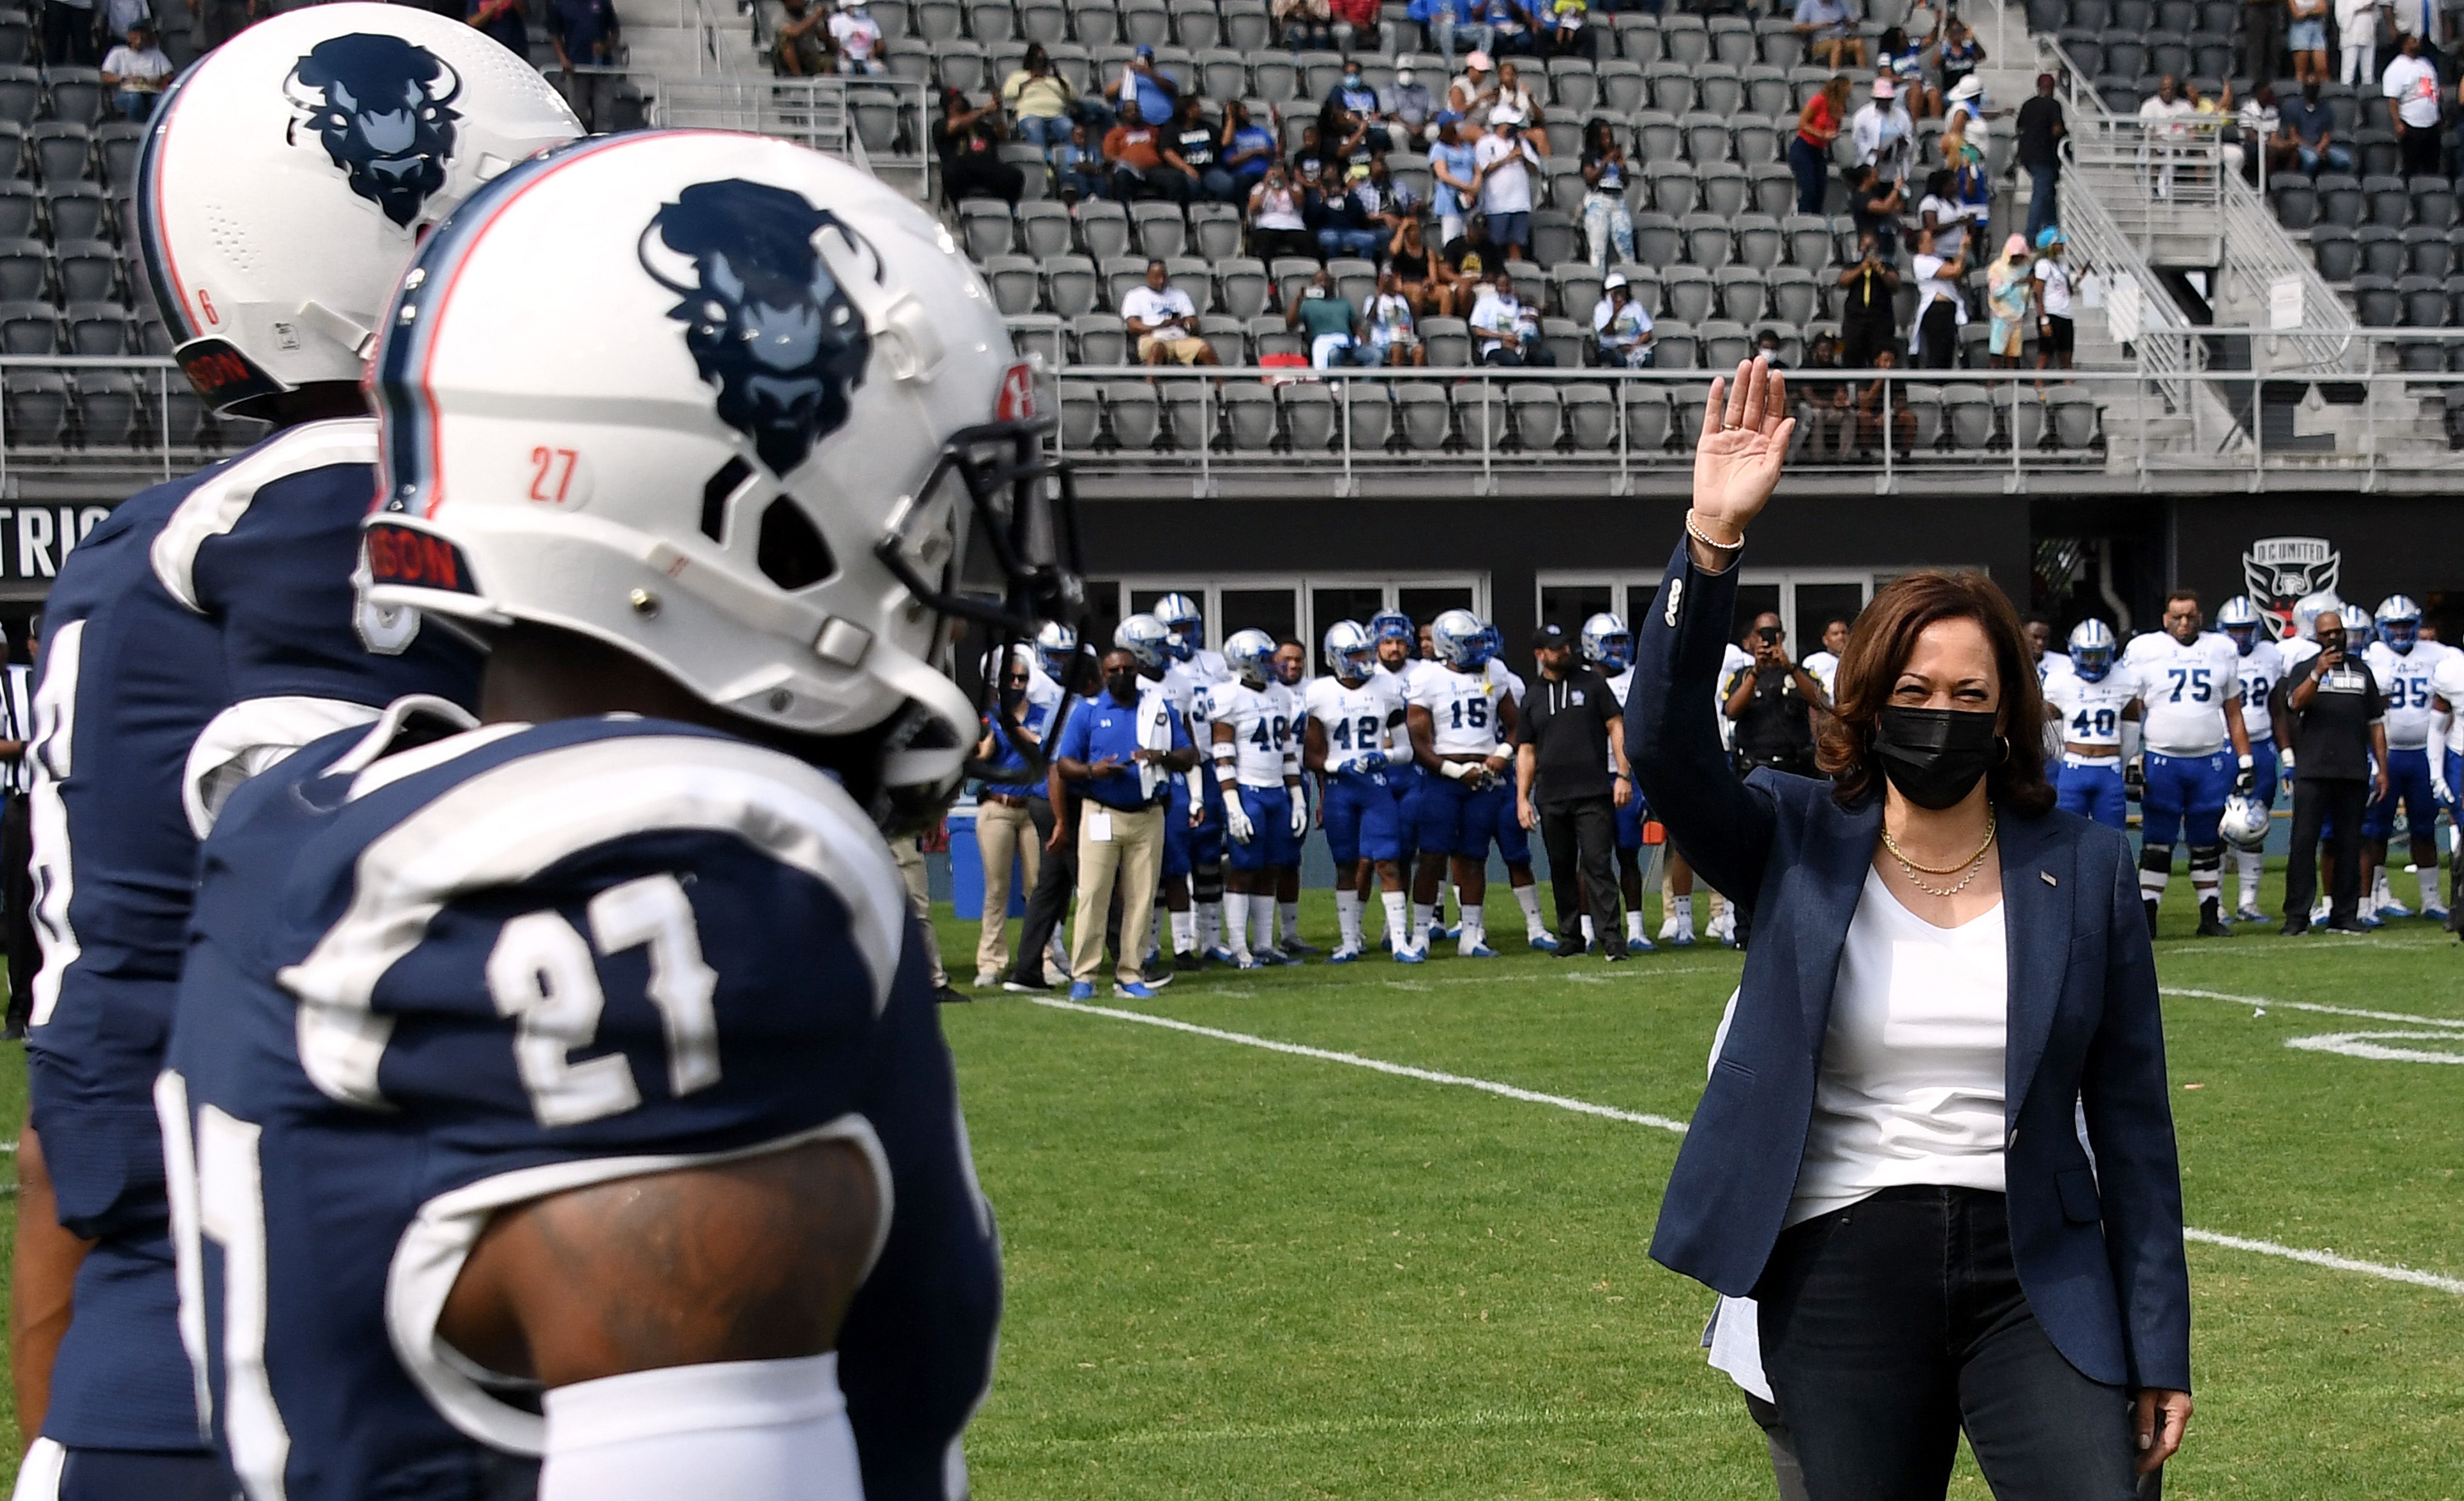 Vice President Kamala Harris participates in the coin toss at the opening of the football game between Howard University and Hampton University.